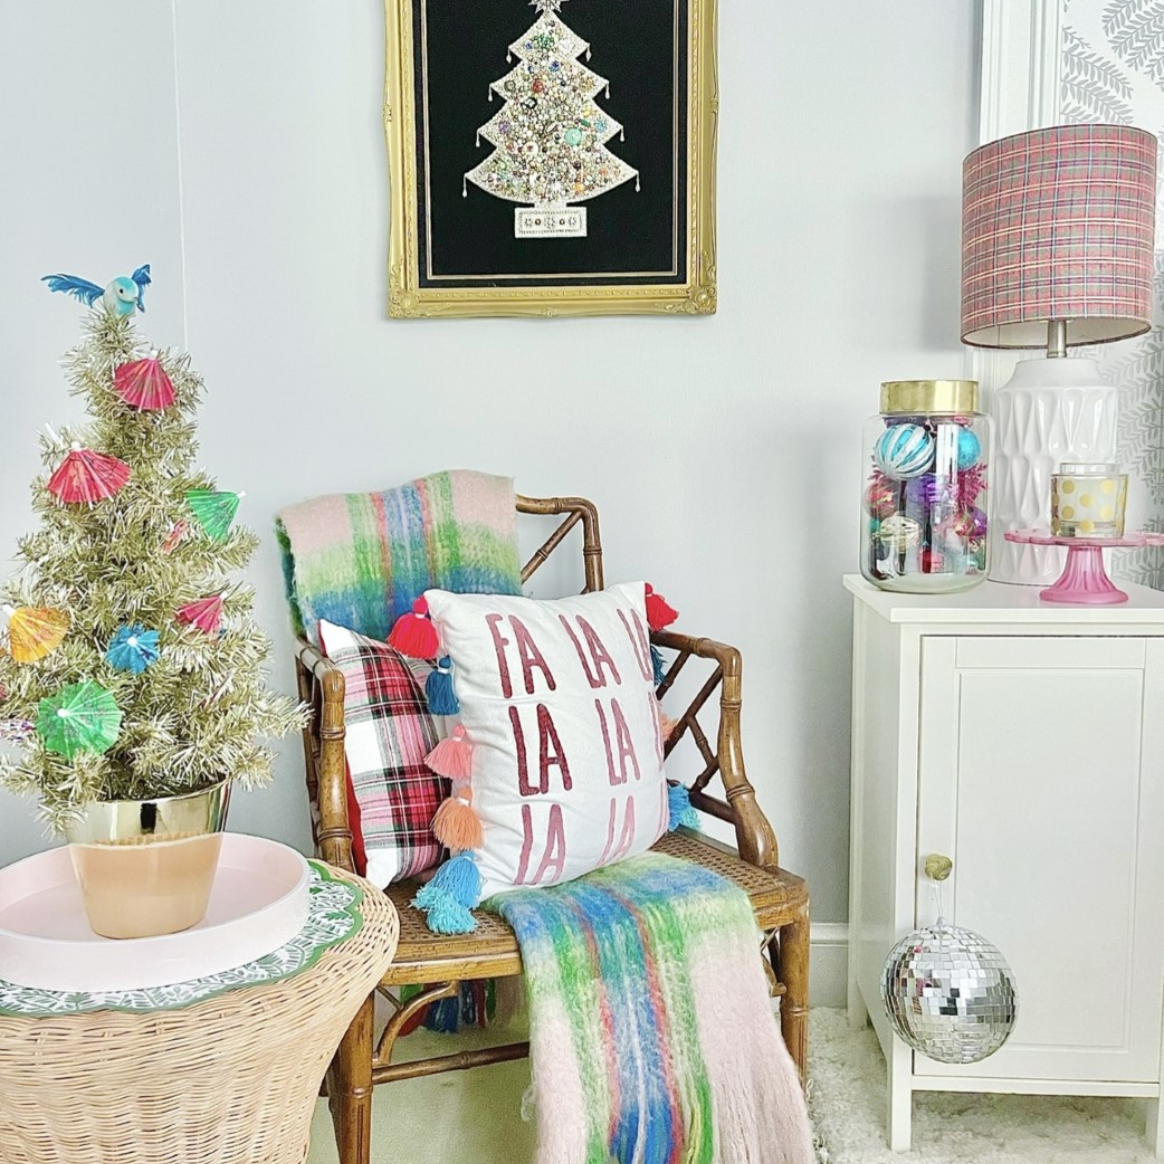 10 Home Influencers Share Their Holiday Decorating Hacks